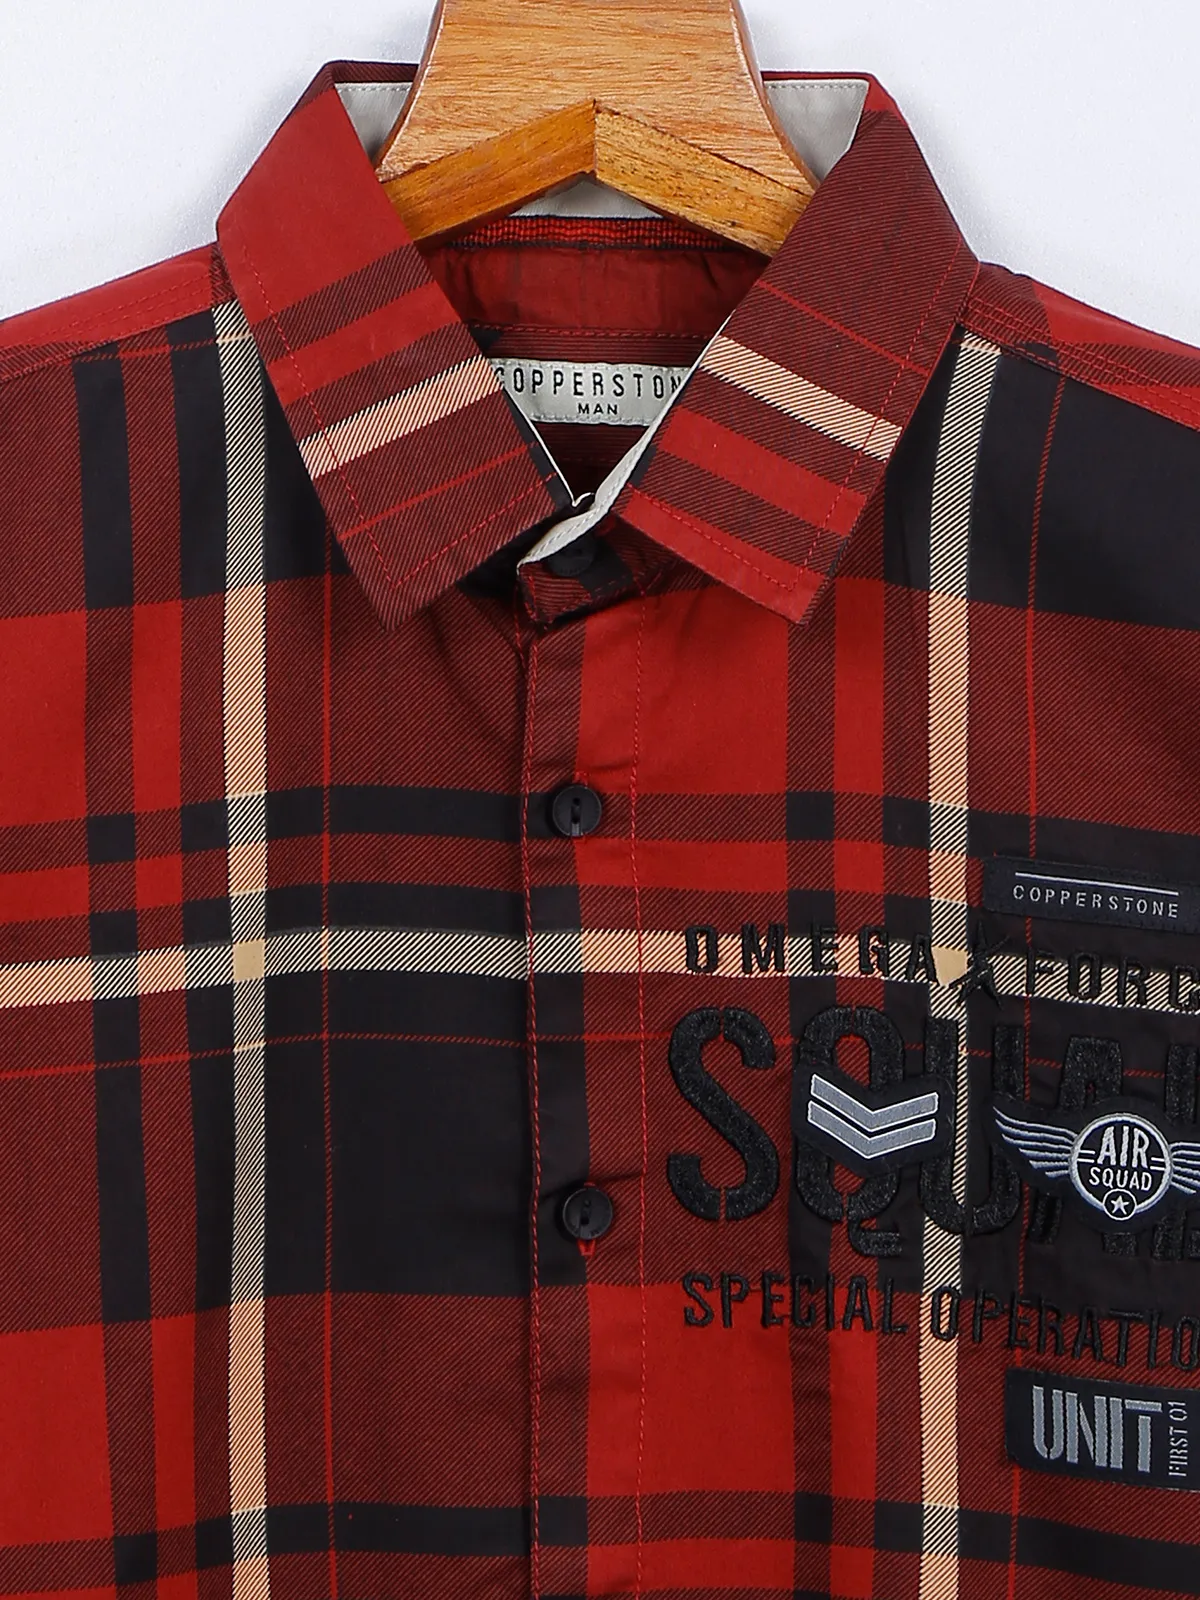 Copperstone cotton red checks shirt